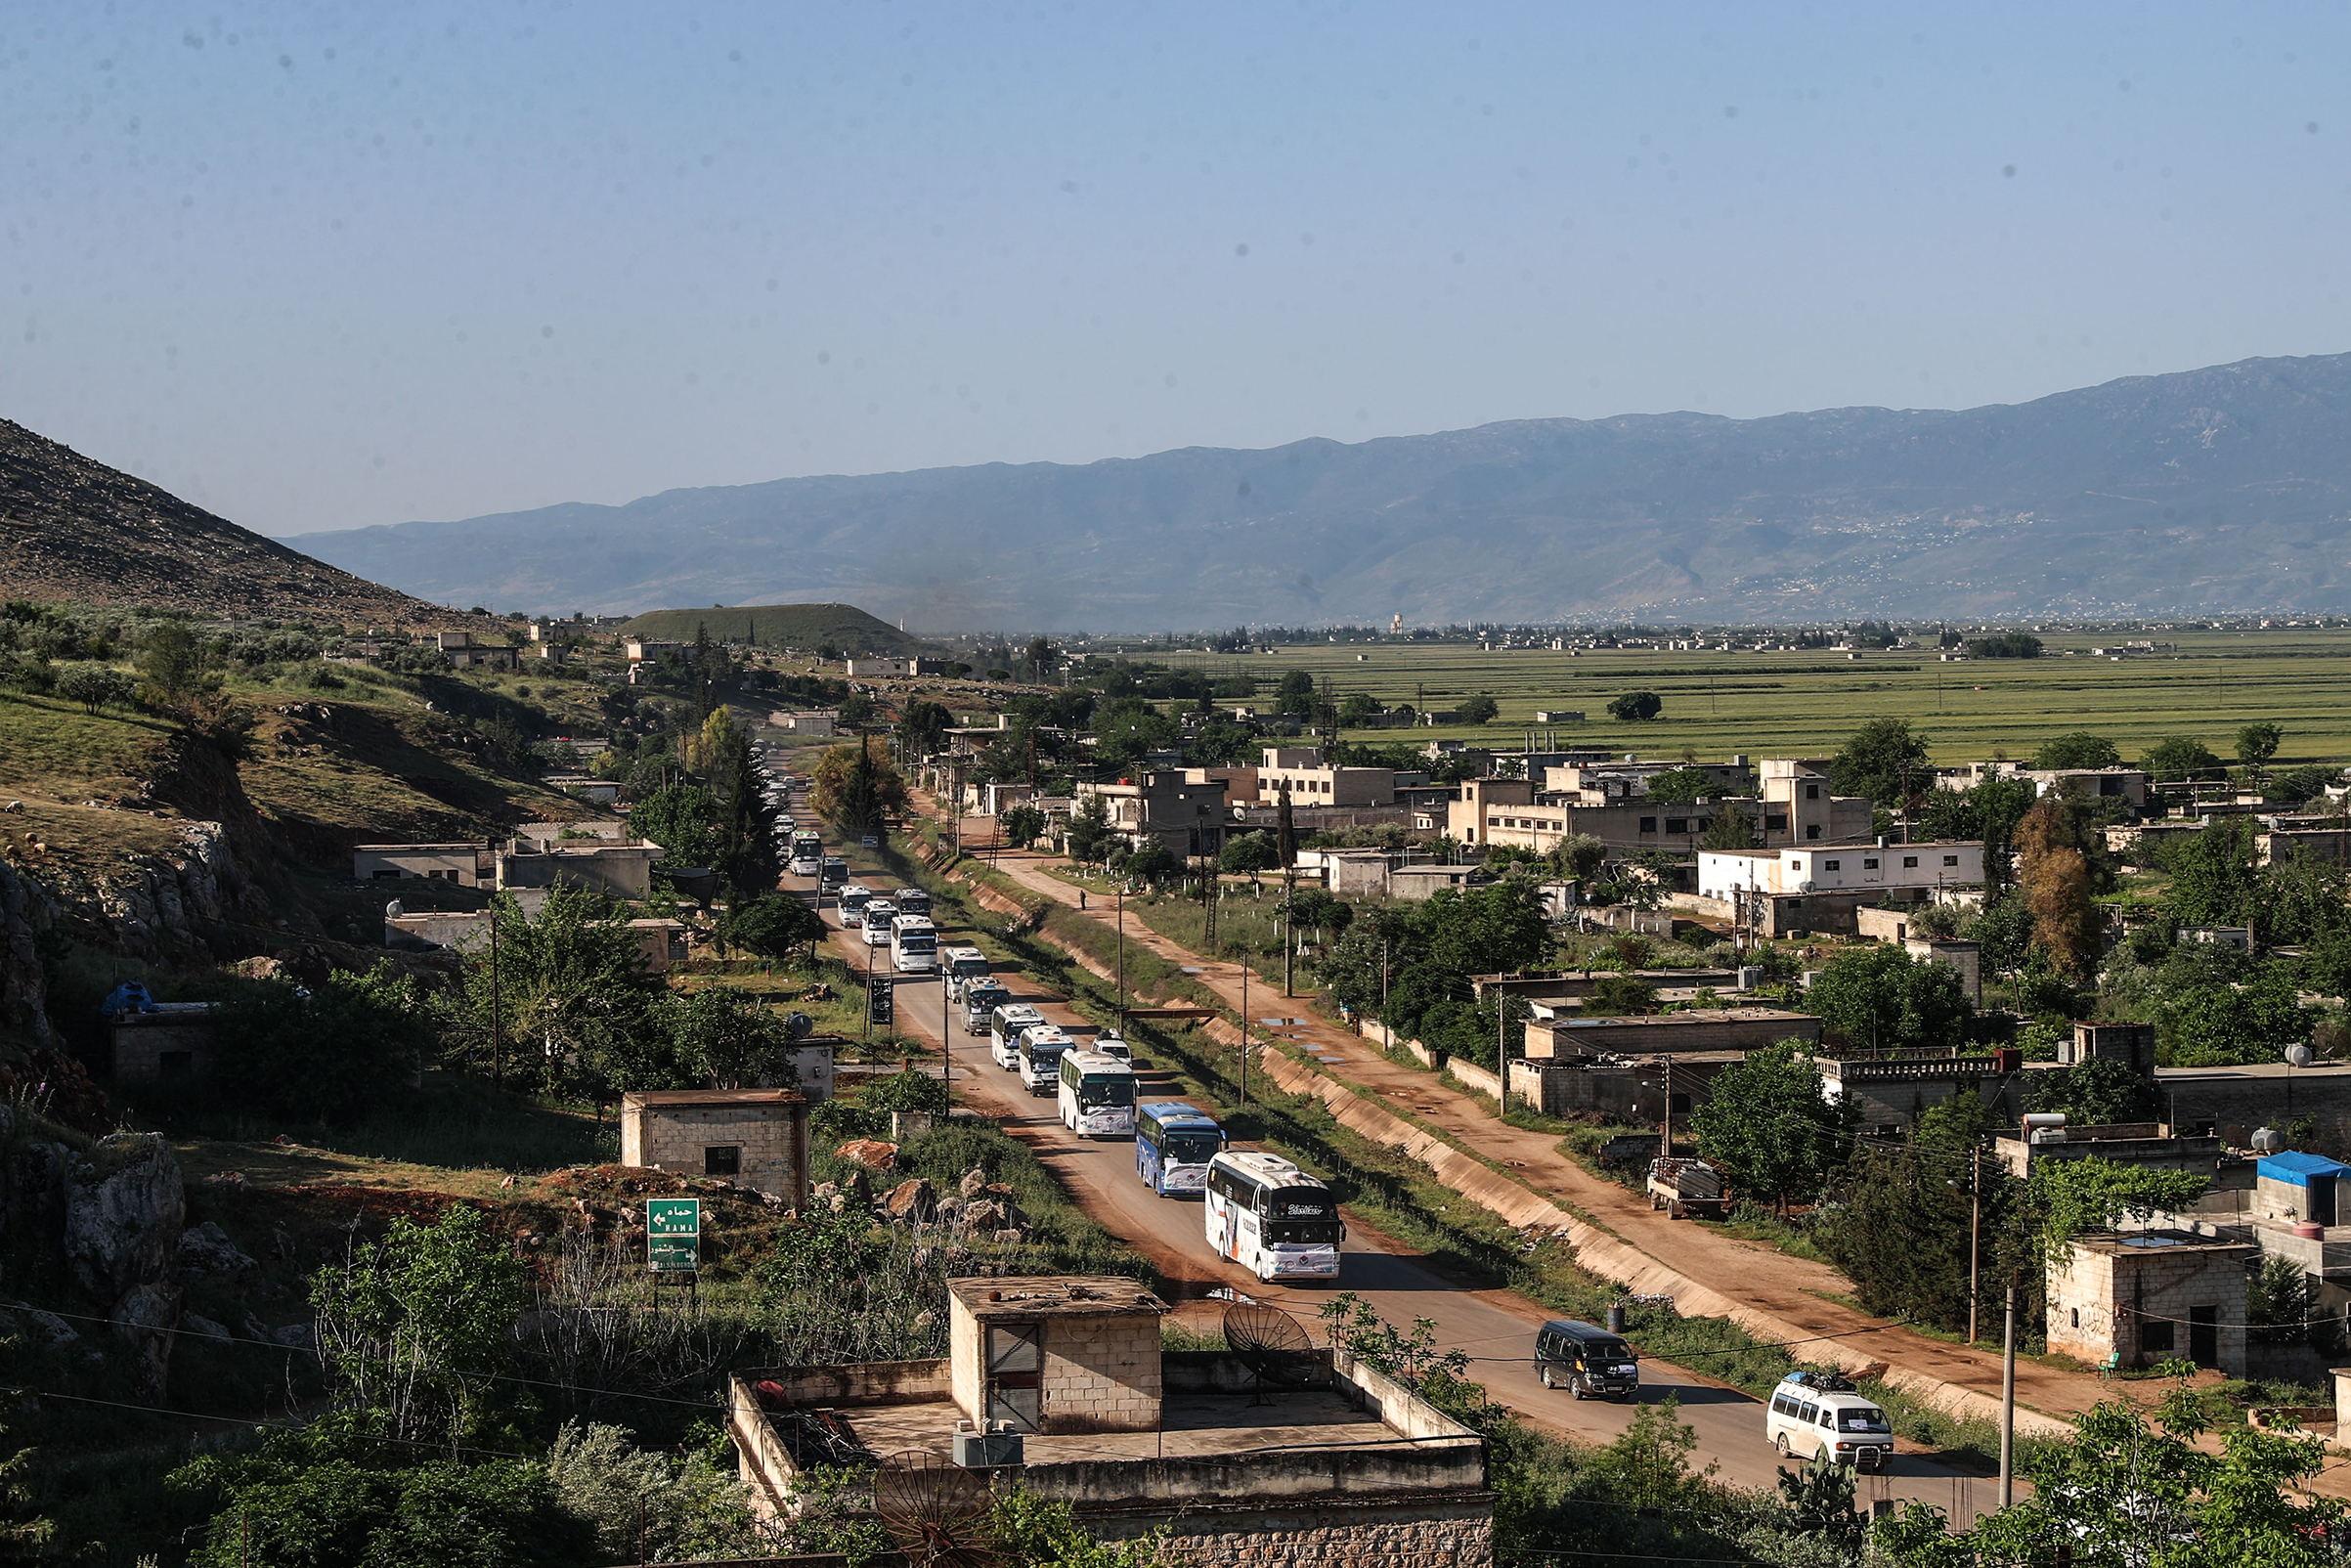 Defeated Syrian rebels fled to Idlib in April in a convoy of buses; the province is now under threat (Mohammed Badra—EPA-EFE/Shutterstock)